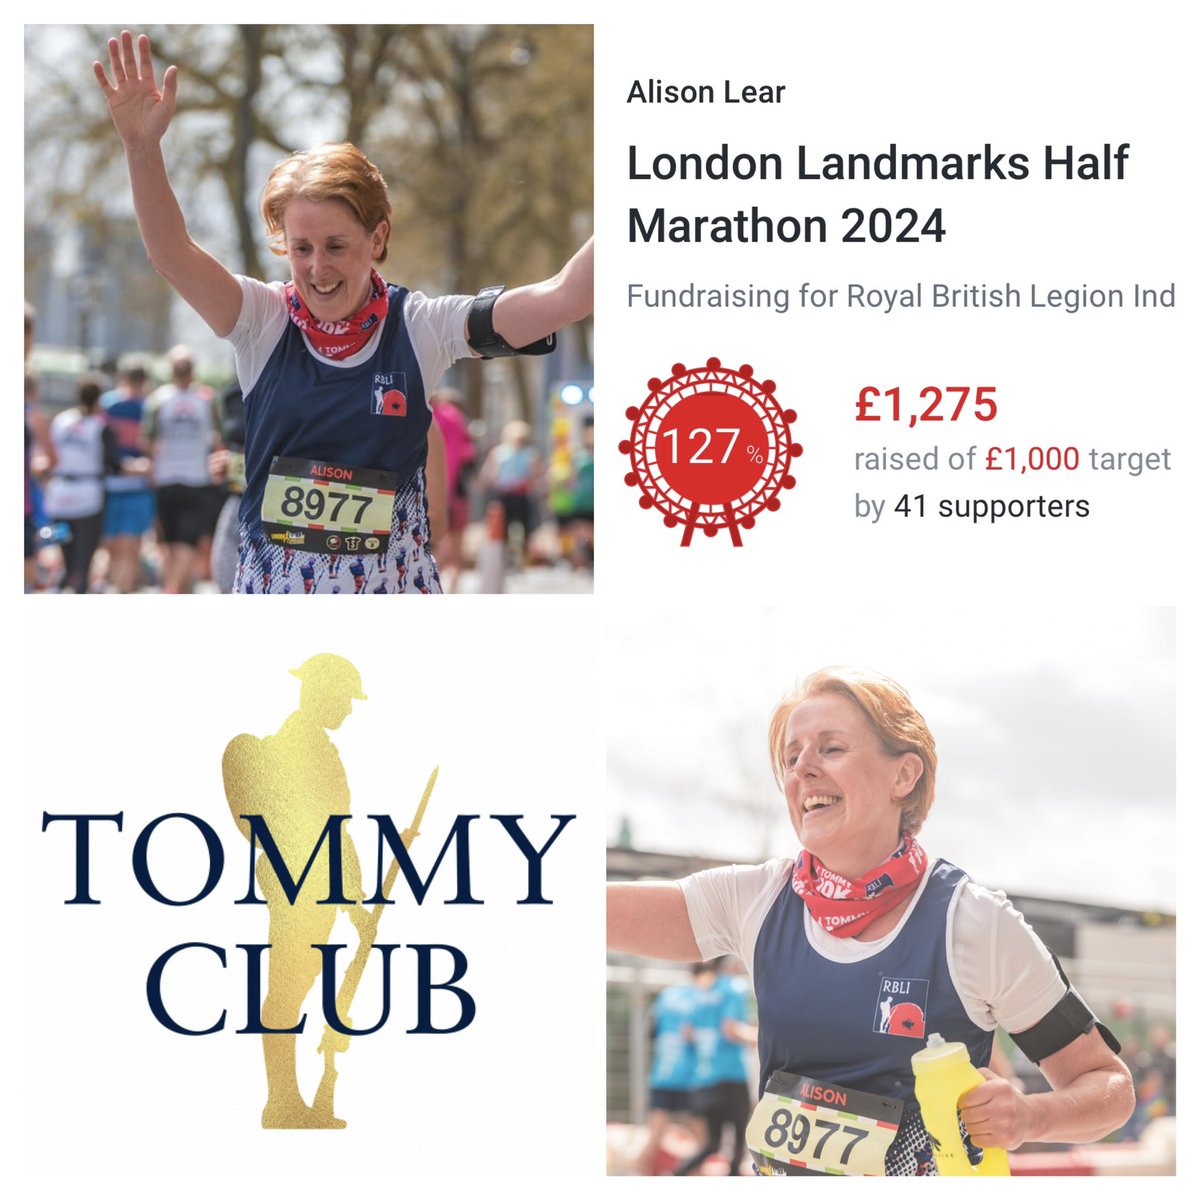 A week on from @LLHalf legs have recovered, am back running, #TeamBrave photos released(📷🤪) my final fundraising total is in🙌🎯 If you would like to be part of something amazing, please consider joining the Tommy Club @RBLI We would love to have you🙏 tommyclub.co.uk